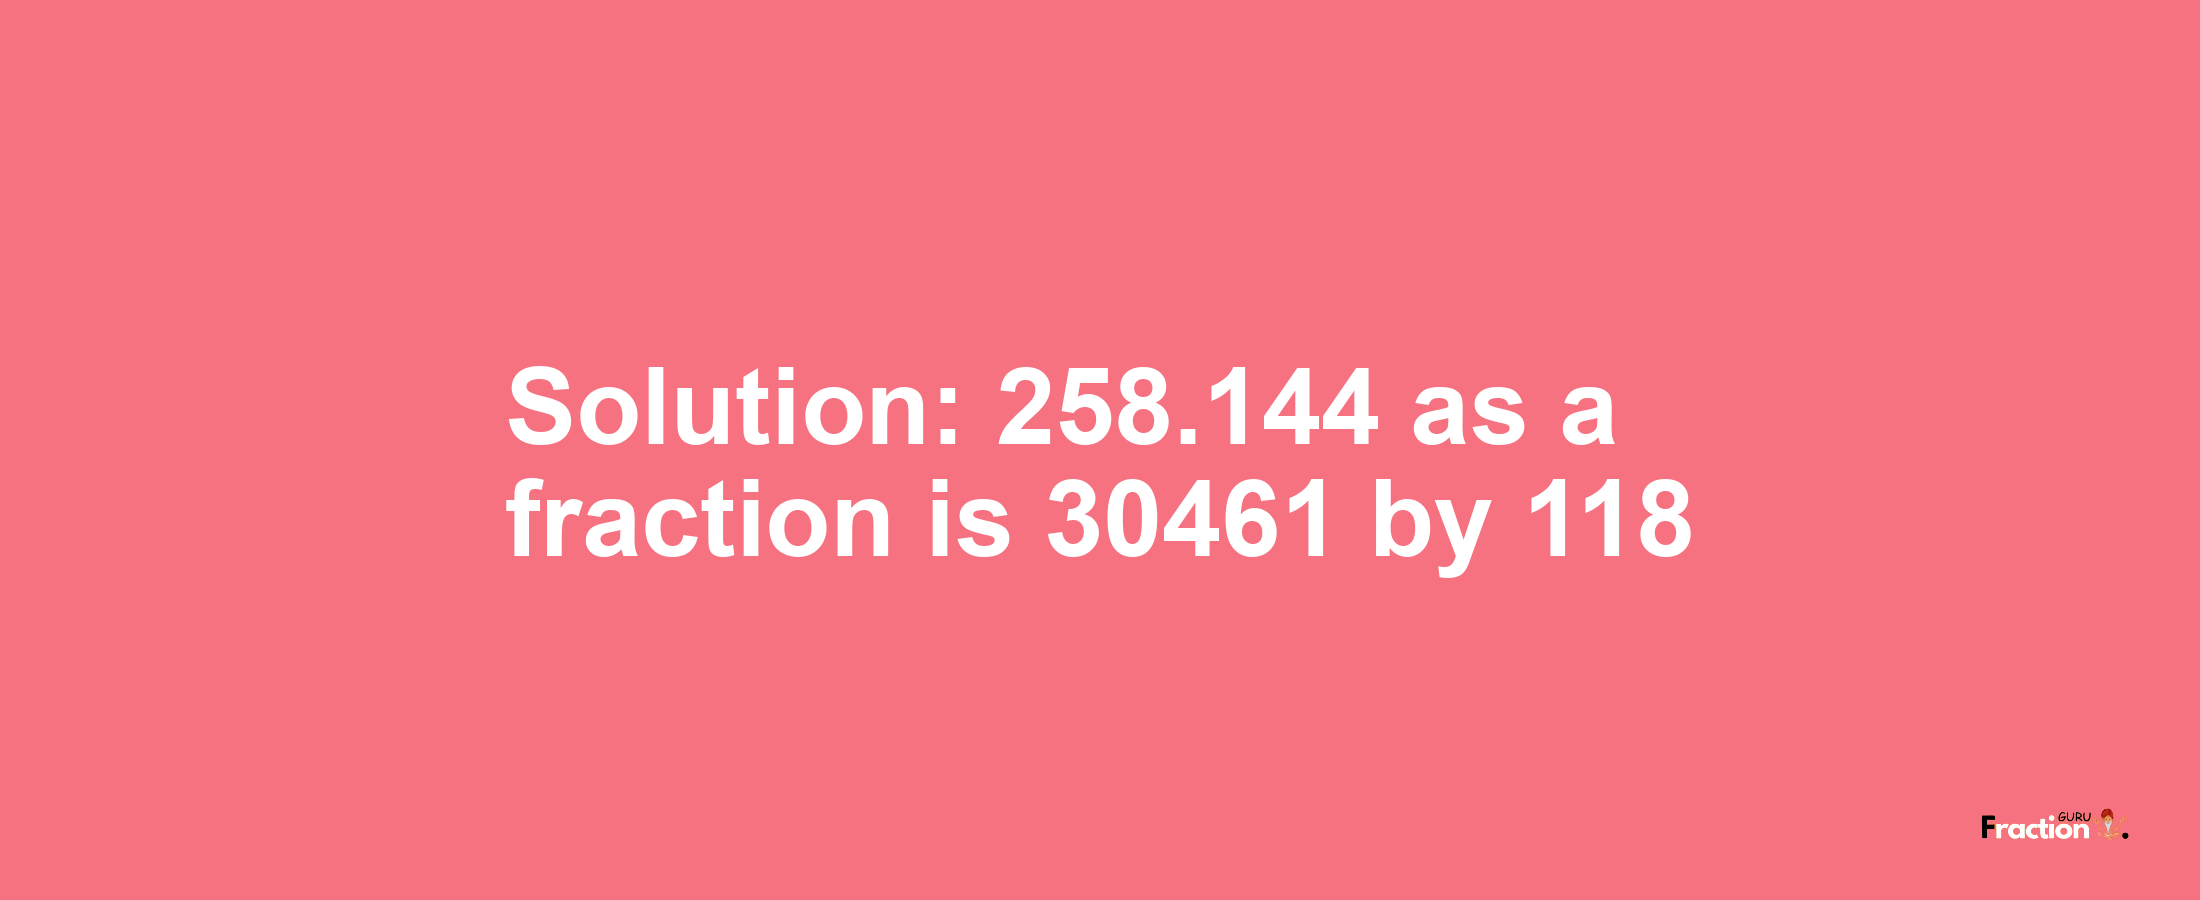 Solution:258.144 as a fraction is 30461/118